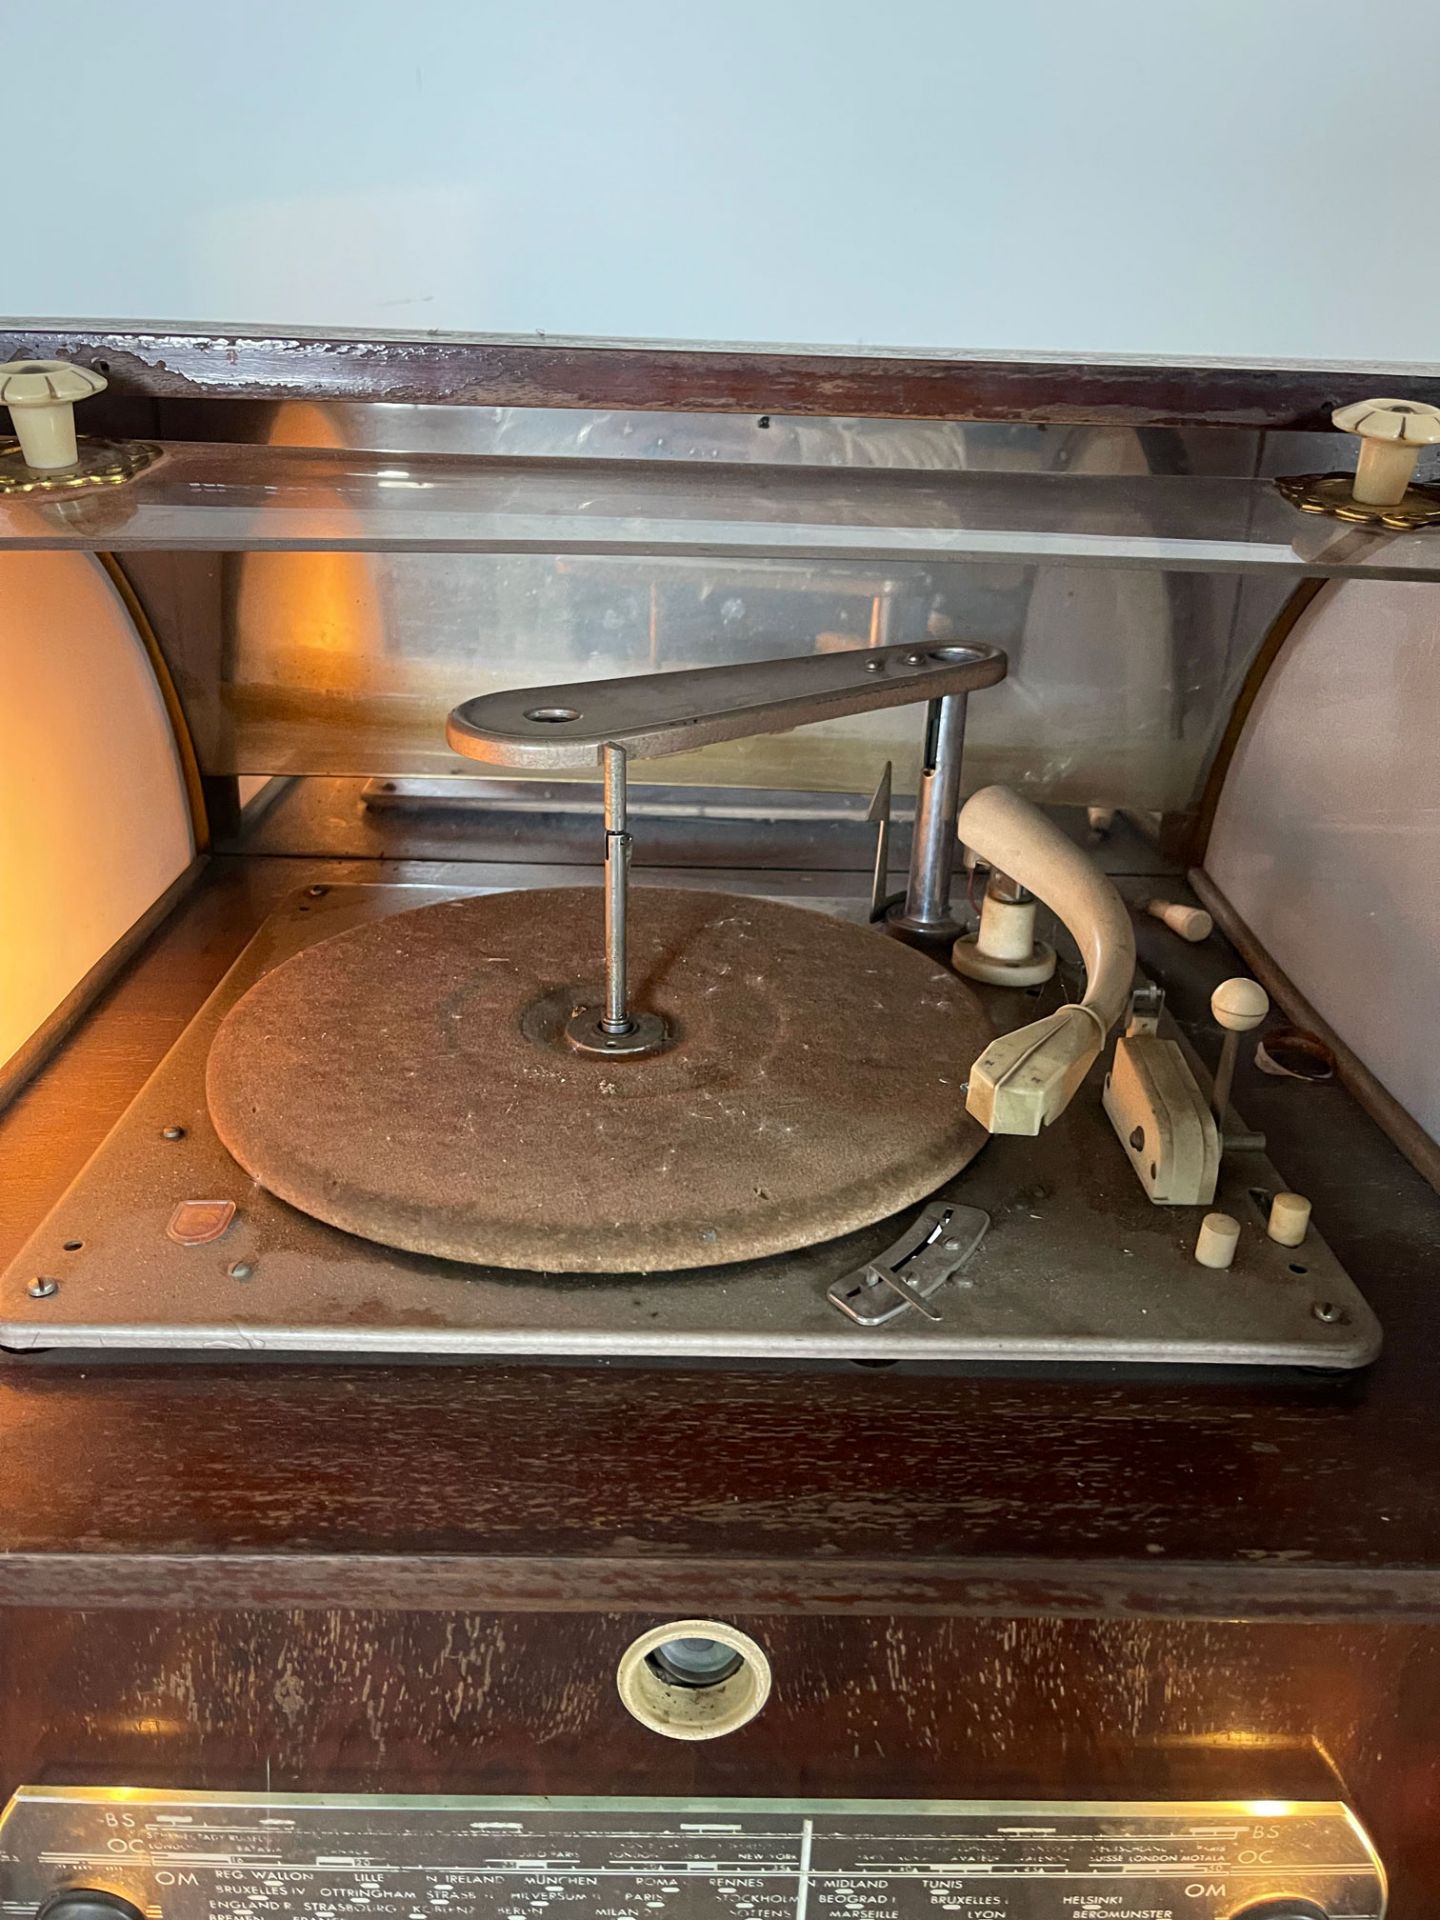 Mid-Fifties Valcke Heule Belgian Coin-Op Radio & Record Player - Image 12 of 15